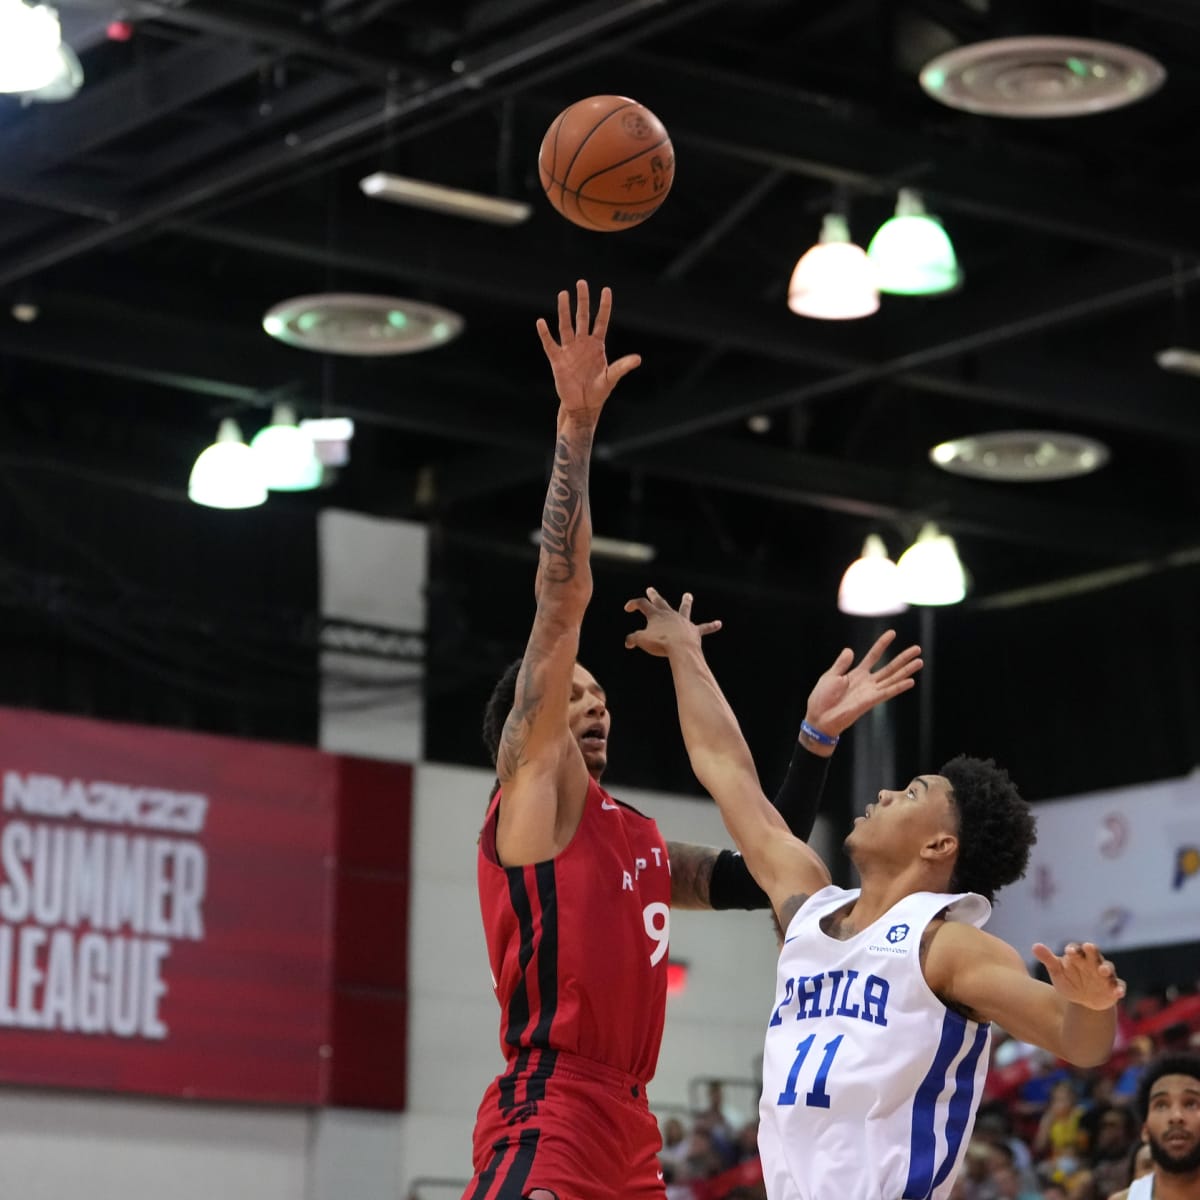 Family, FaceTime, Future: Jaden Springer and 76ers Connected By